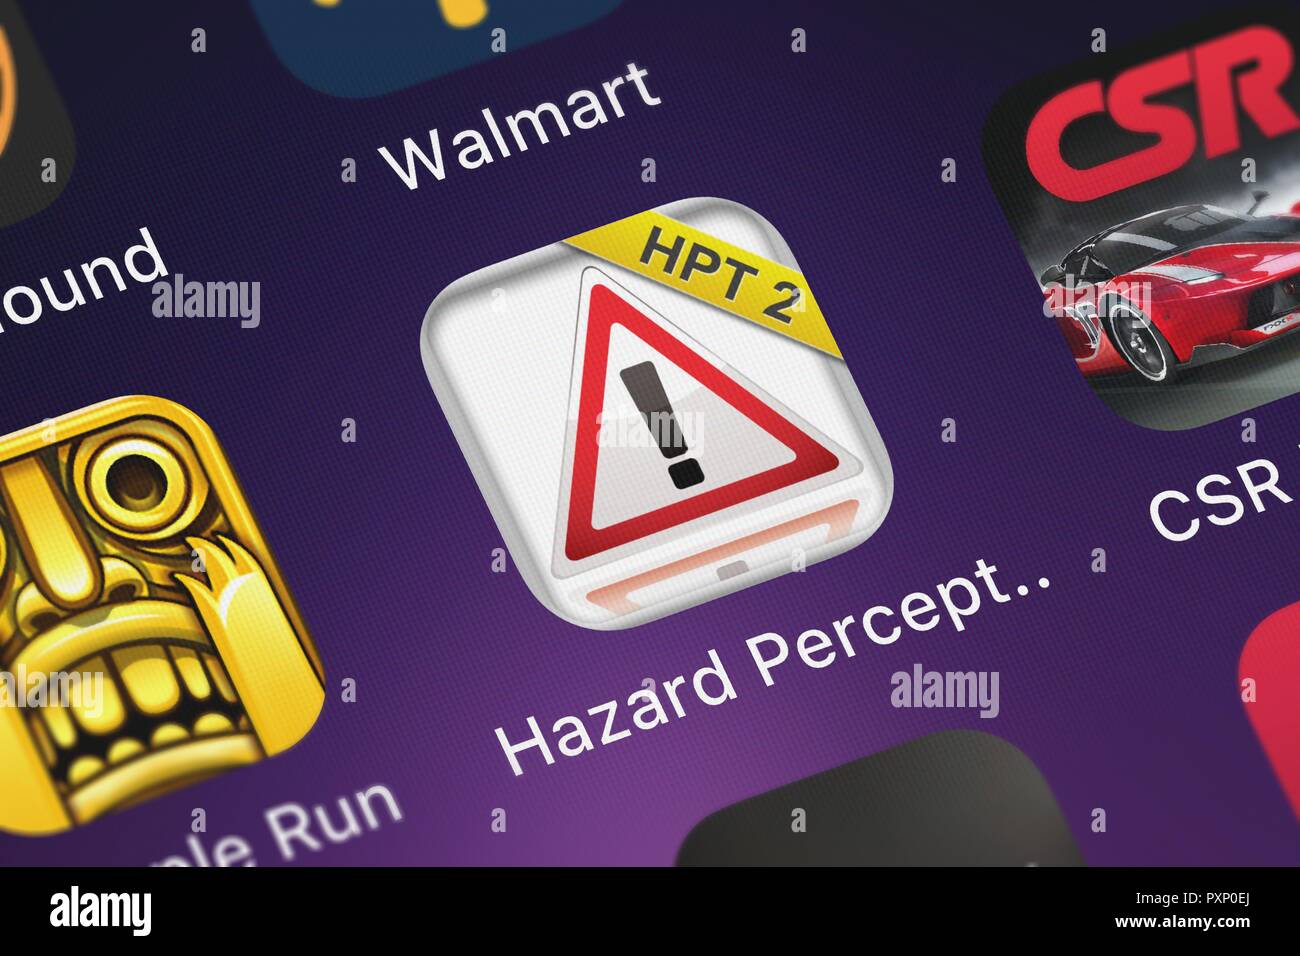 London, United Kingdom - October 23, 2018: Screenshot of the Hazard Perception Test - Volume 2 mobile app from Iteration Mobile S.L icon on an iPhone. Stock Photo